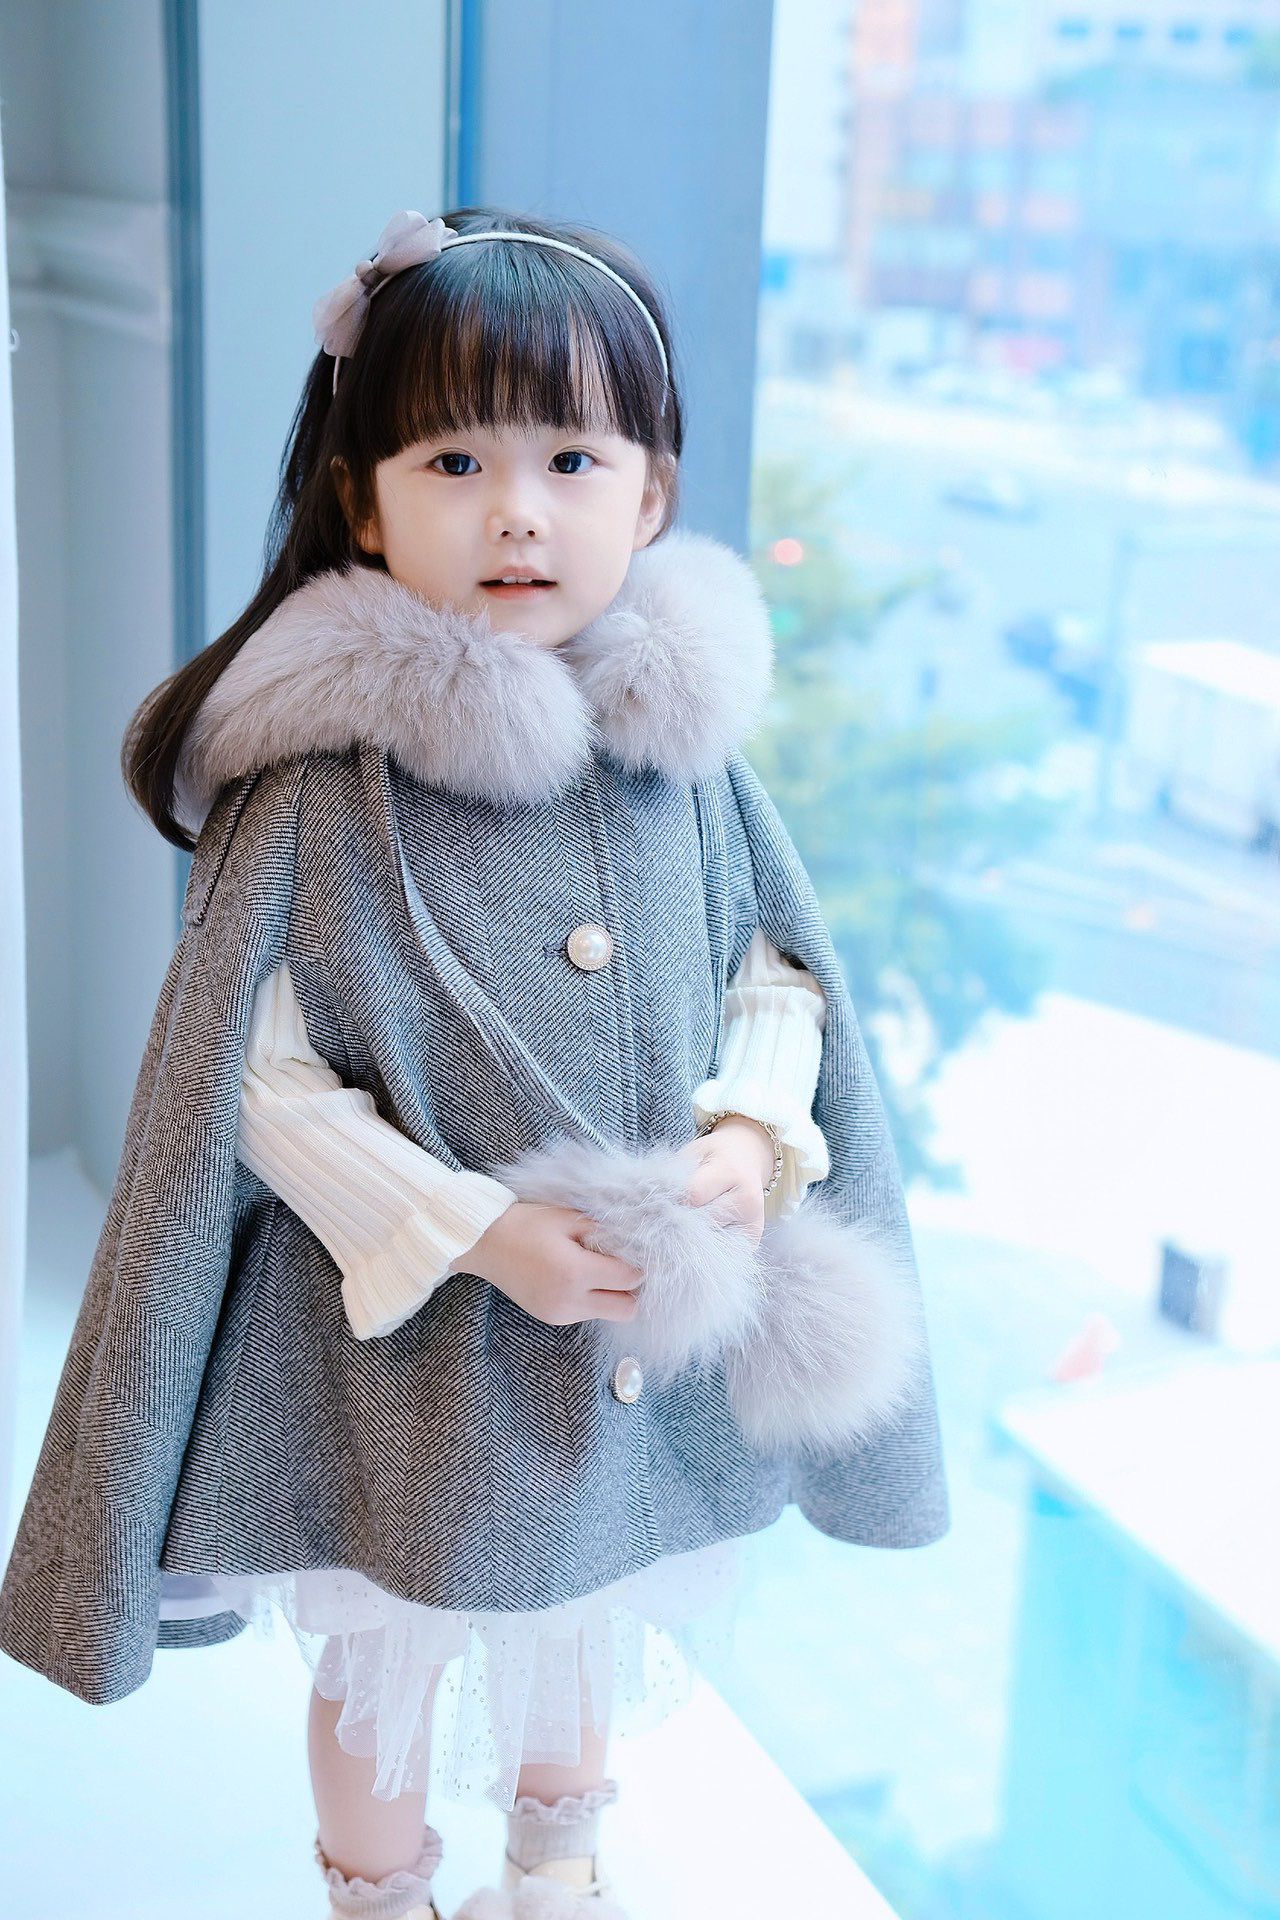 

Baby Girl poncho real fox Fur Winter Infant Toddler Child Princess Hooded Cape Fur Collar girls Outwear Cloak Top Warm Clothes 2-12Y, Gray